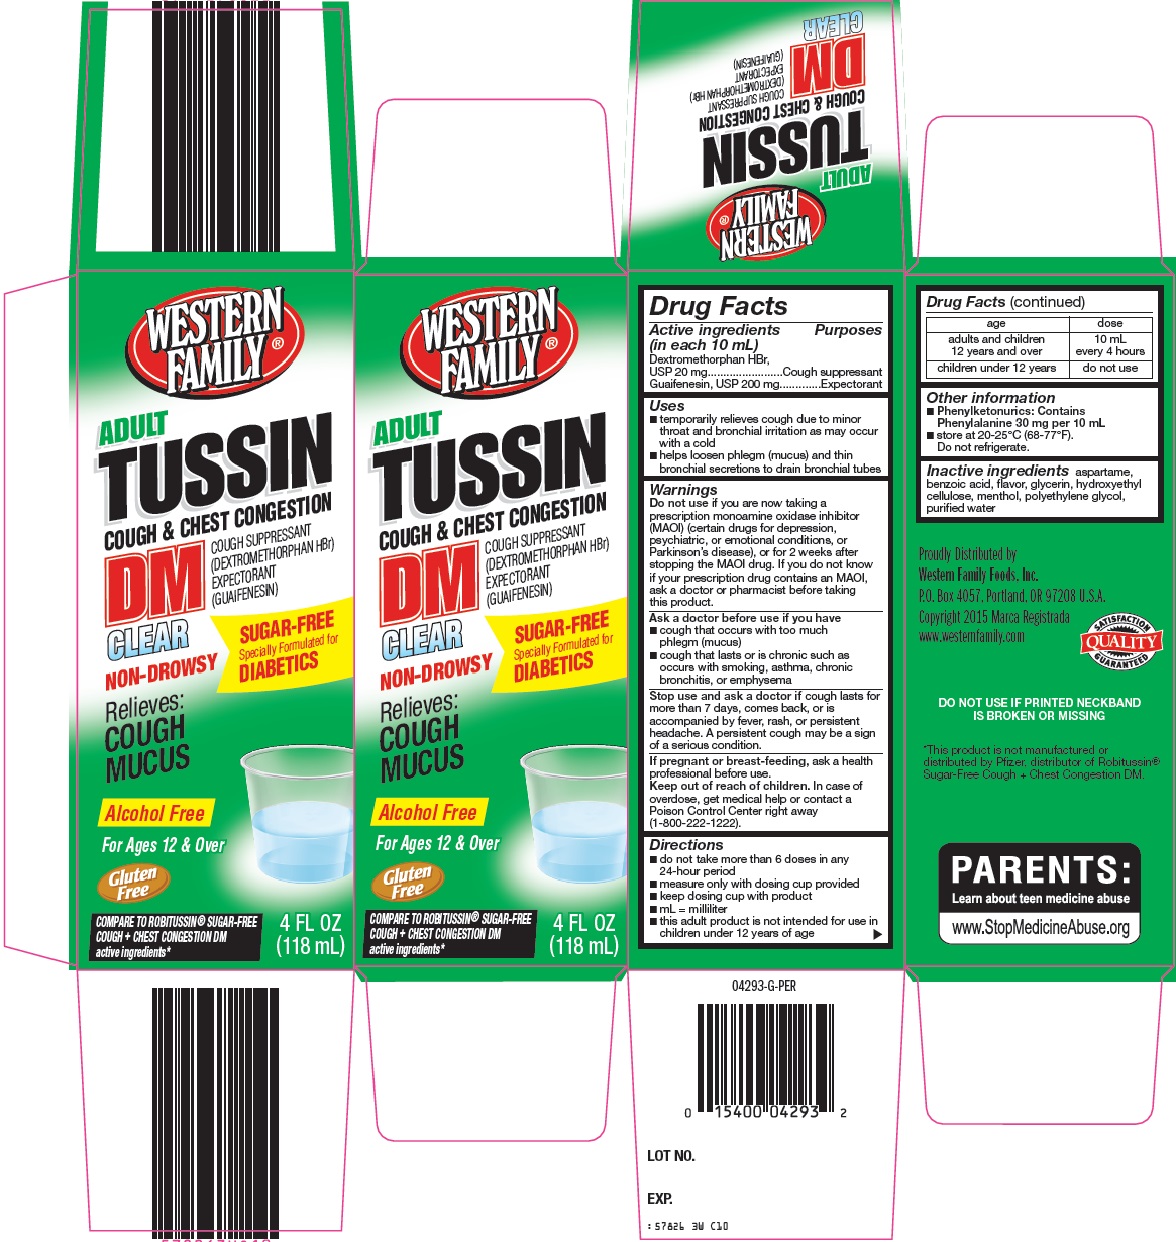 Western Family Tussin DM image